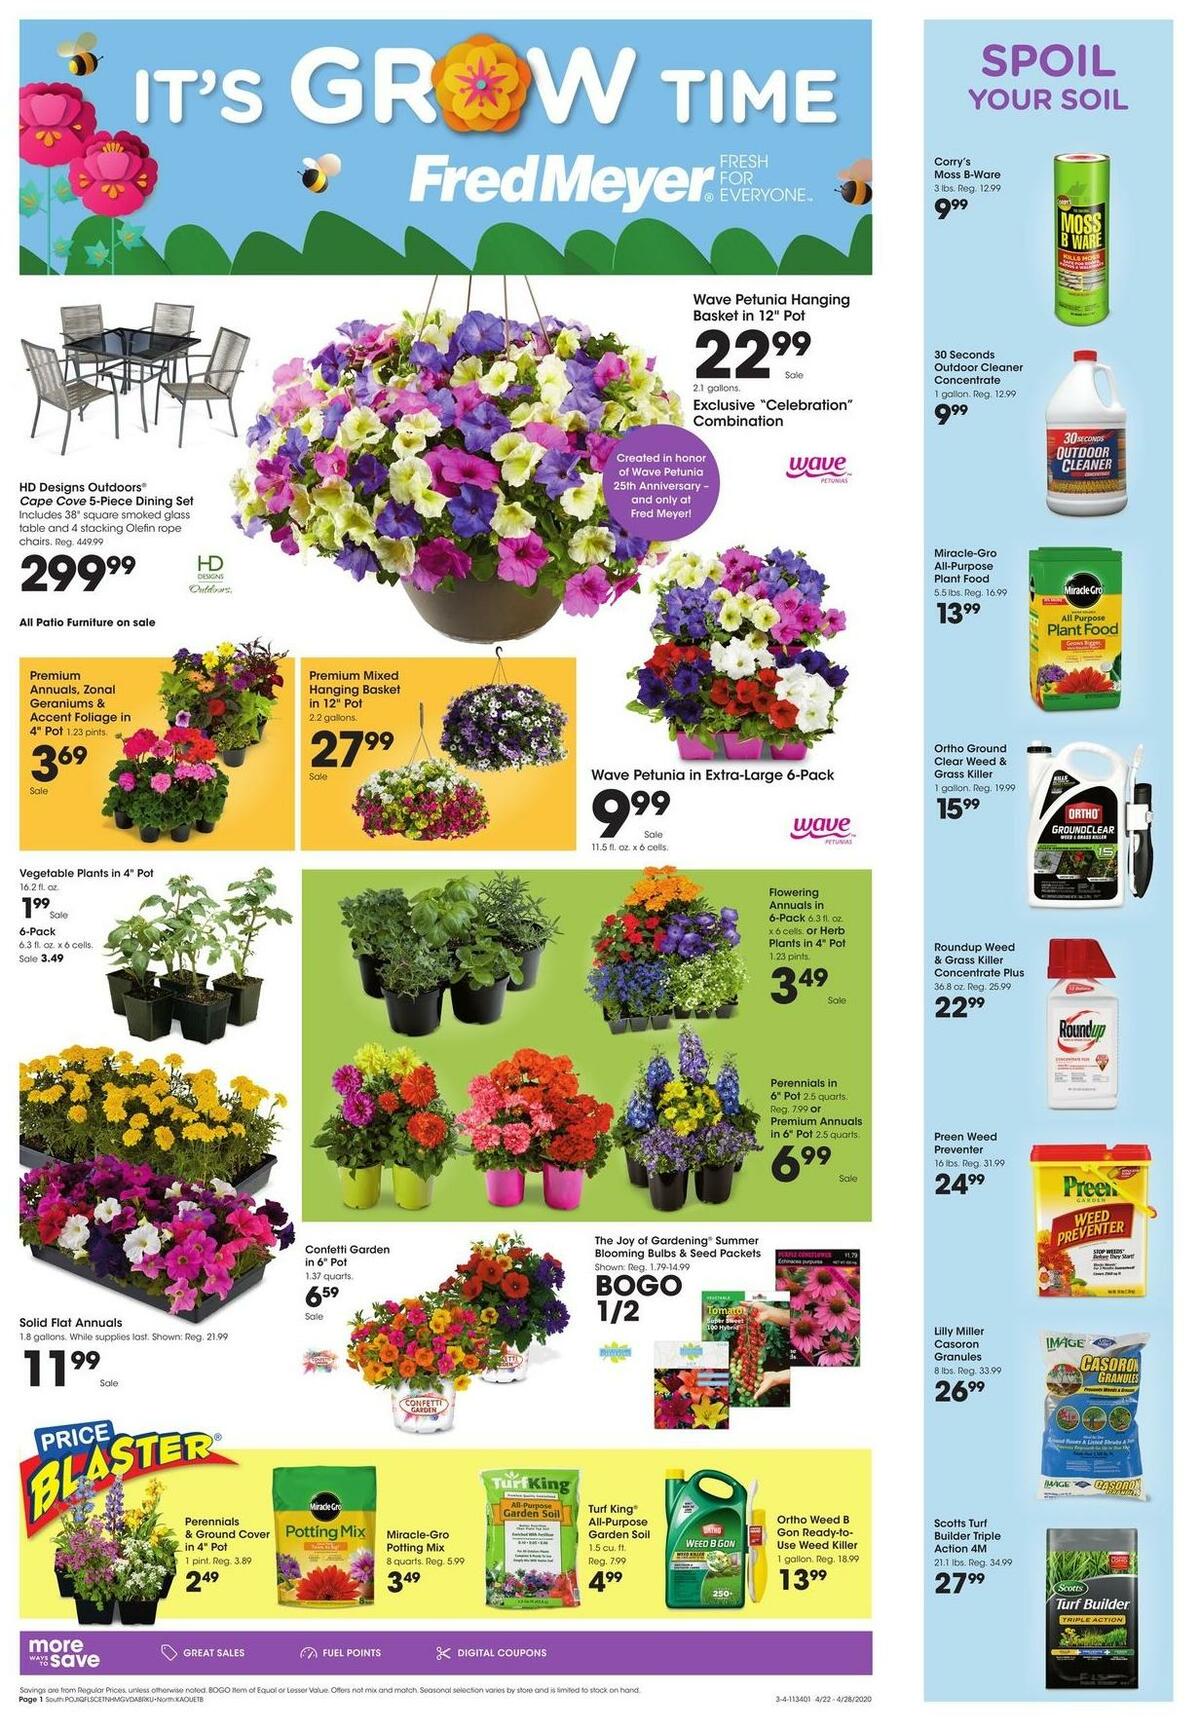 Fred Meyer Garden Weekly Ad & Specials from April 22